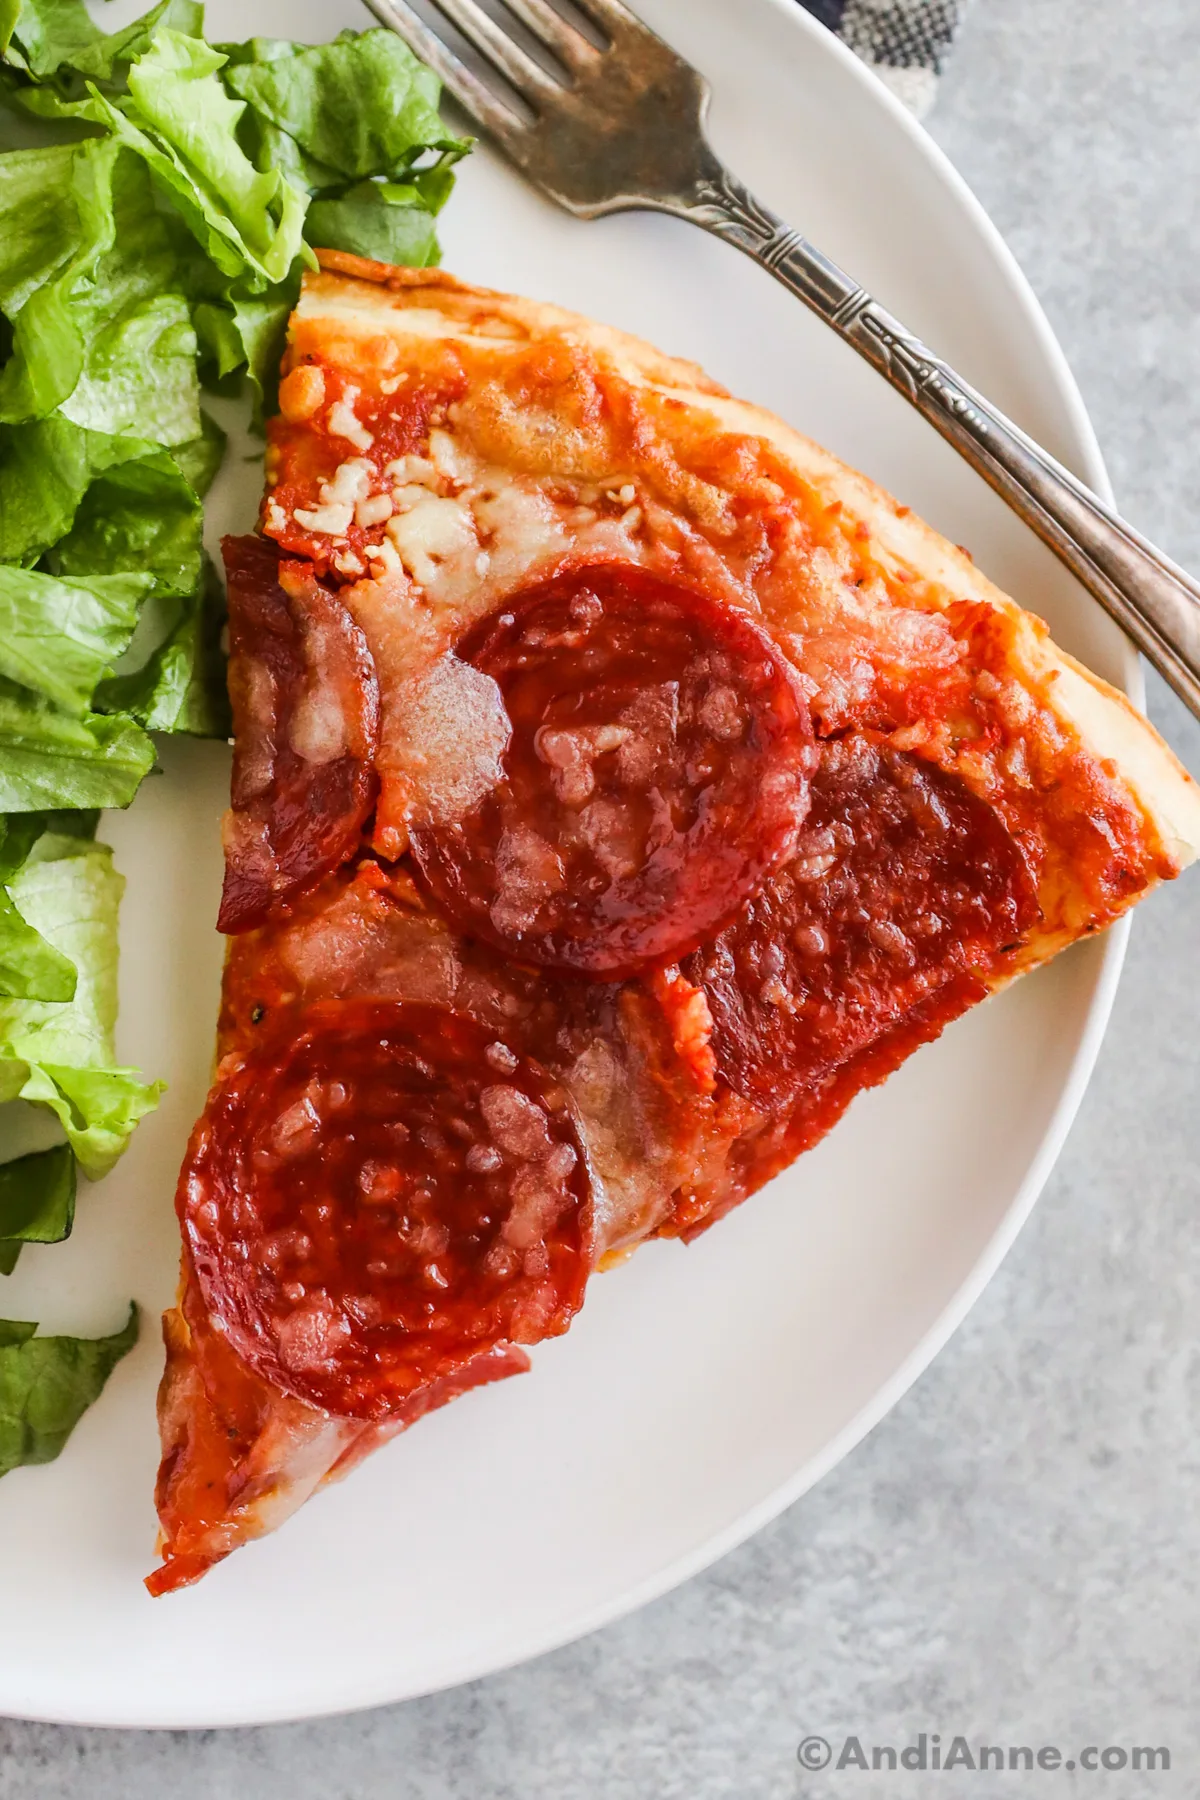 A slice of Costco pepperoni pizza with lettuce and a fork on a plate.